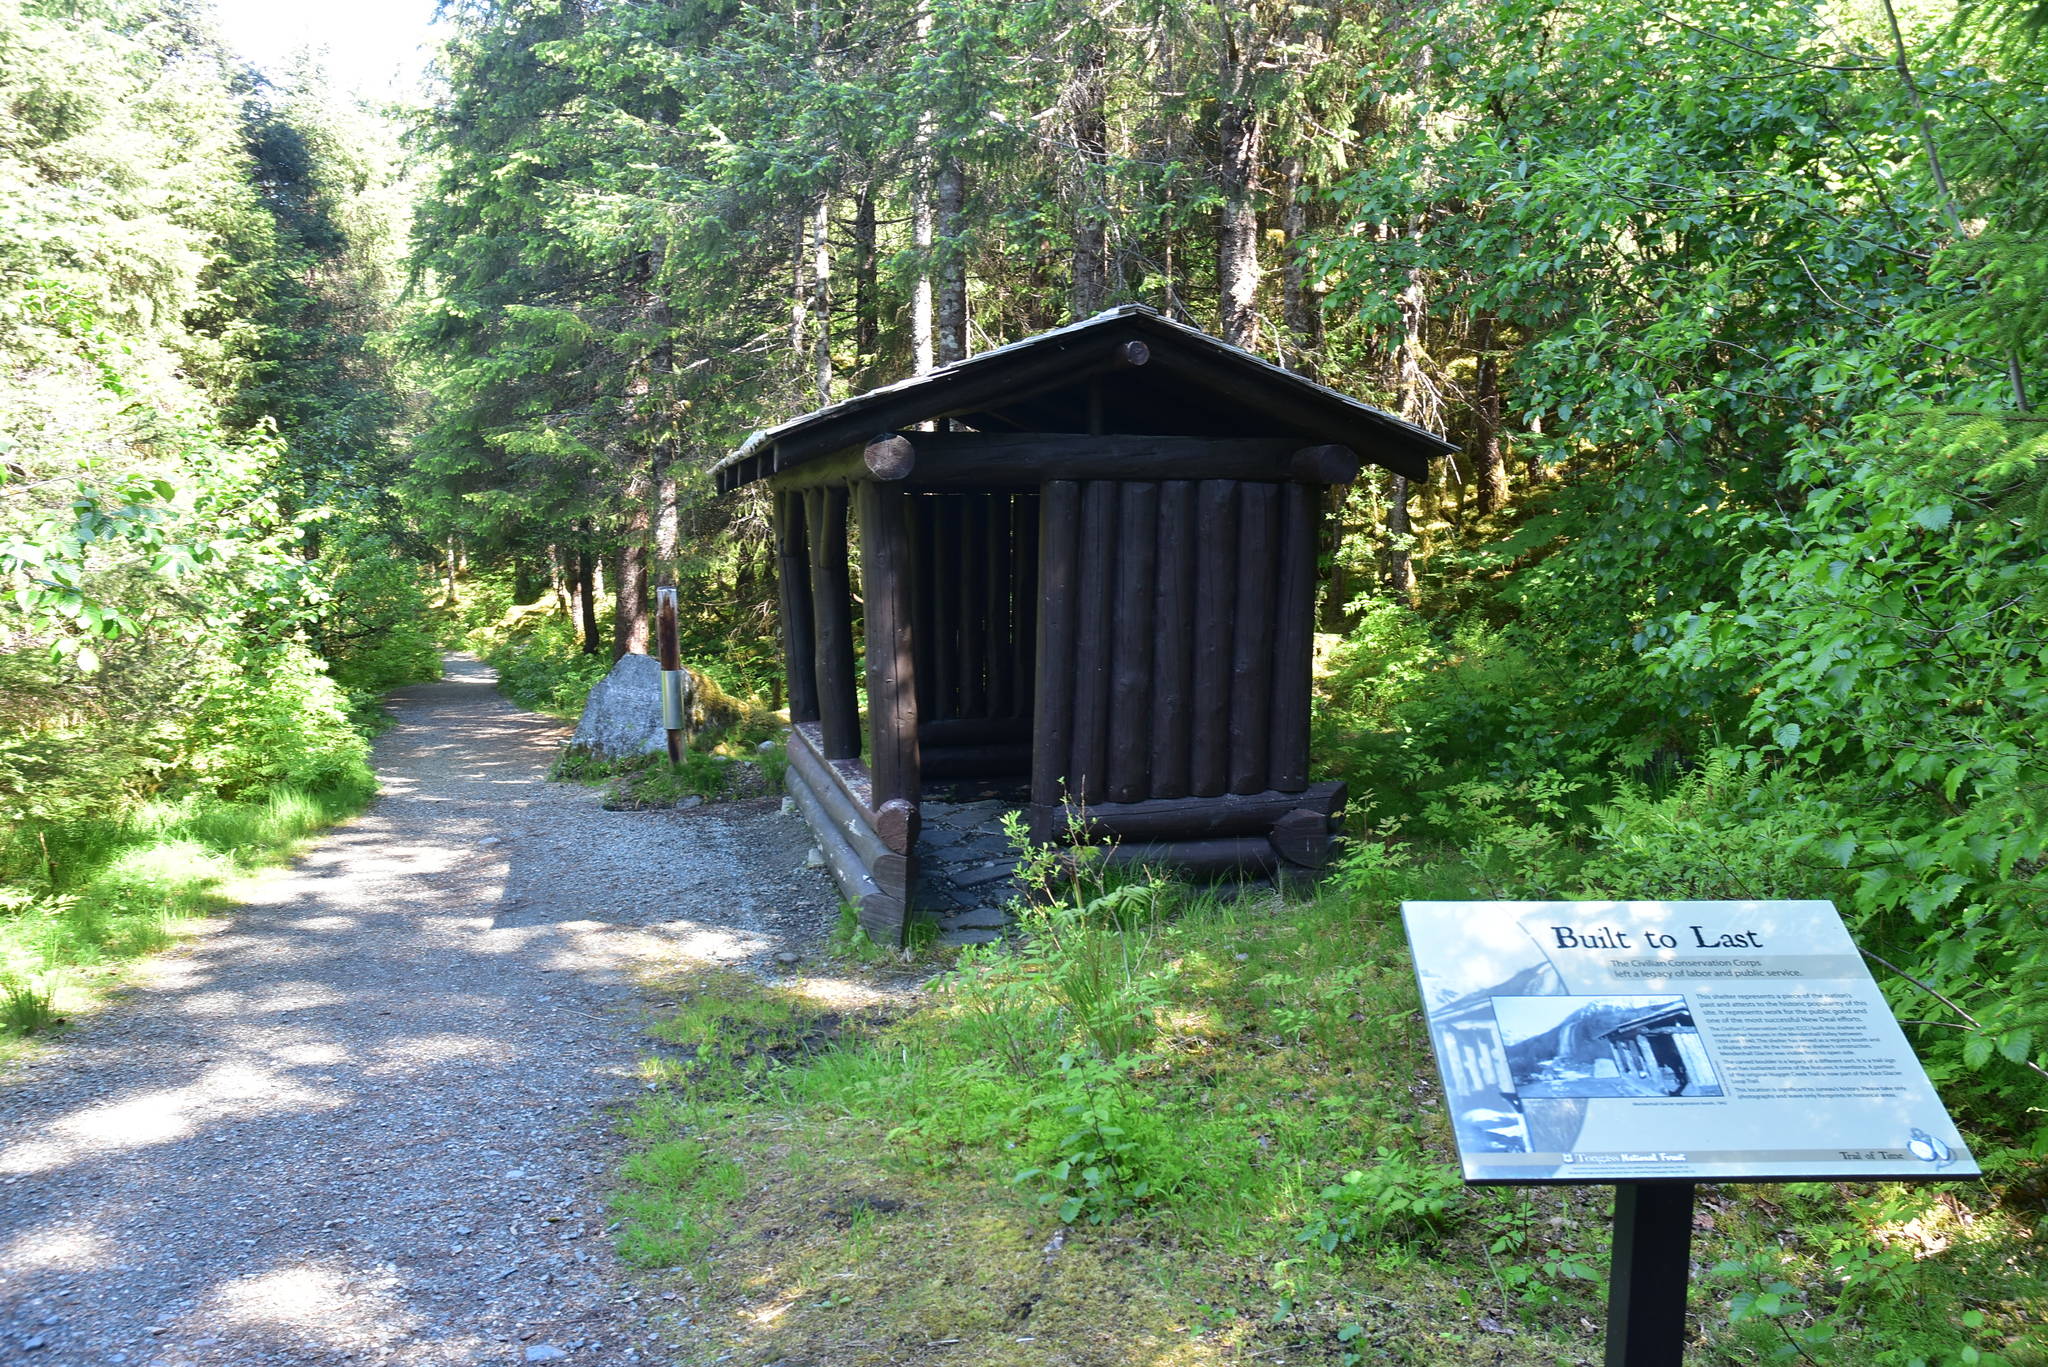 A recreation of a Civilian Conservation Corps shelter on a CCC-built Trail of Time behind the Mendenhall Glacier Visitor Center on Friday, June 12, 2020. With high unemployment due to COVID-19, the New Deal program is providing a model for state and local work programs. (Peter Segall | Juneau Empire)